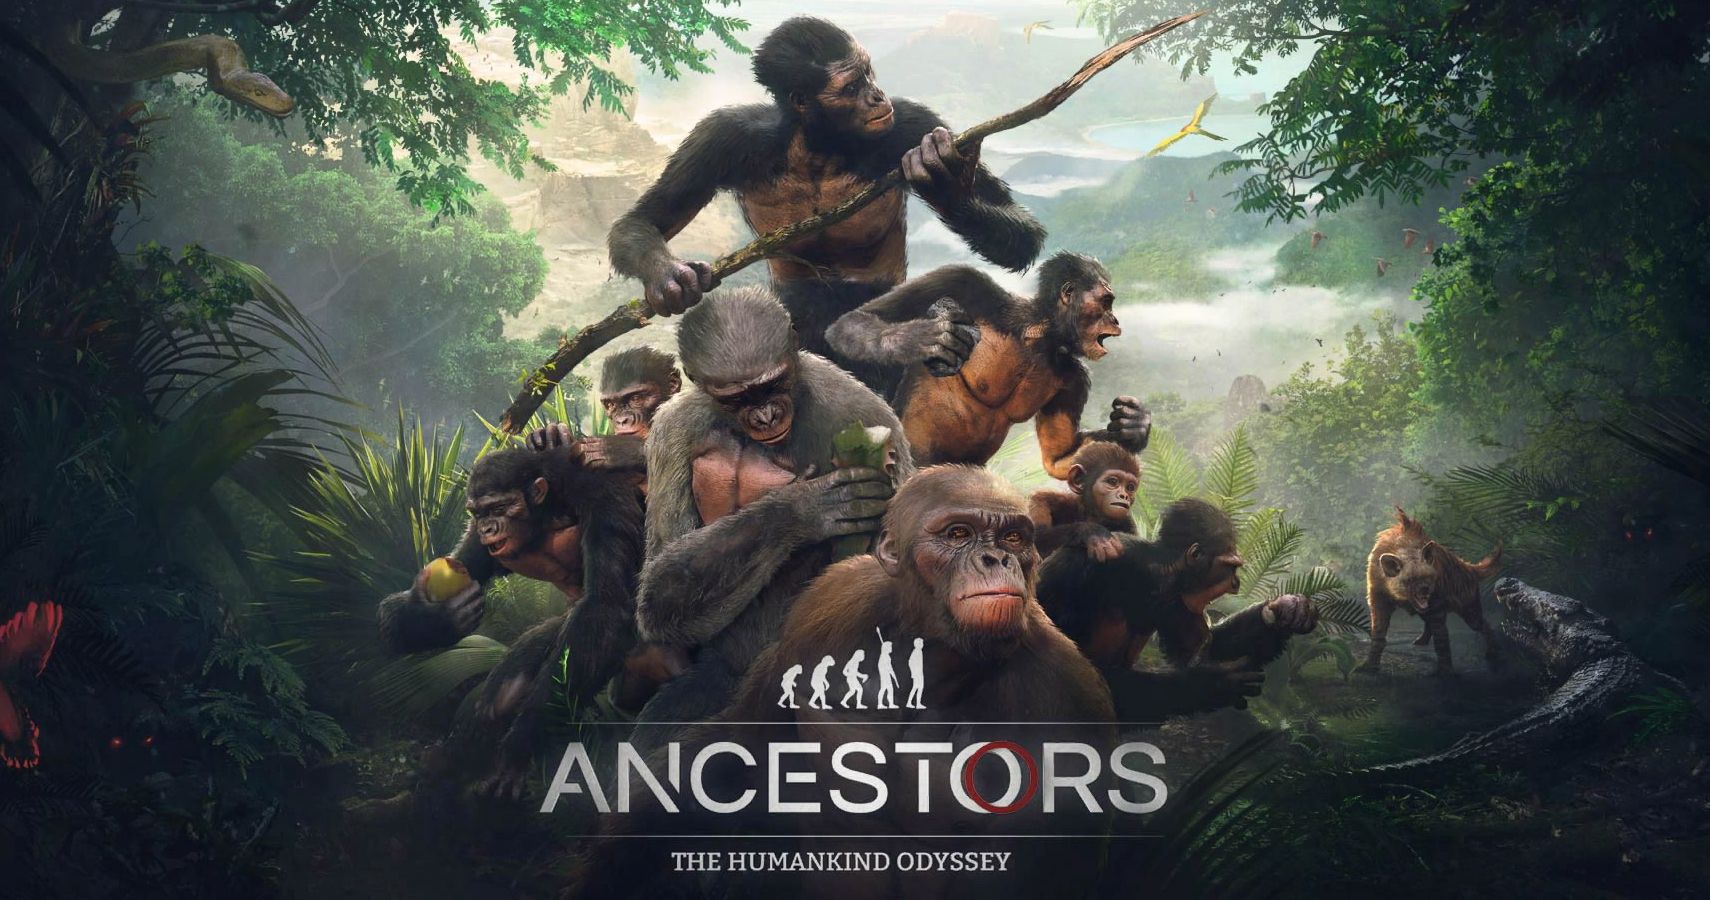 Ancestors The Humankind Odyssey PS4 Review What Early Human Is SLOWLY Evolving!